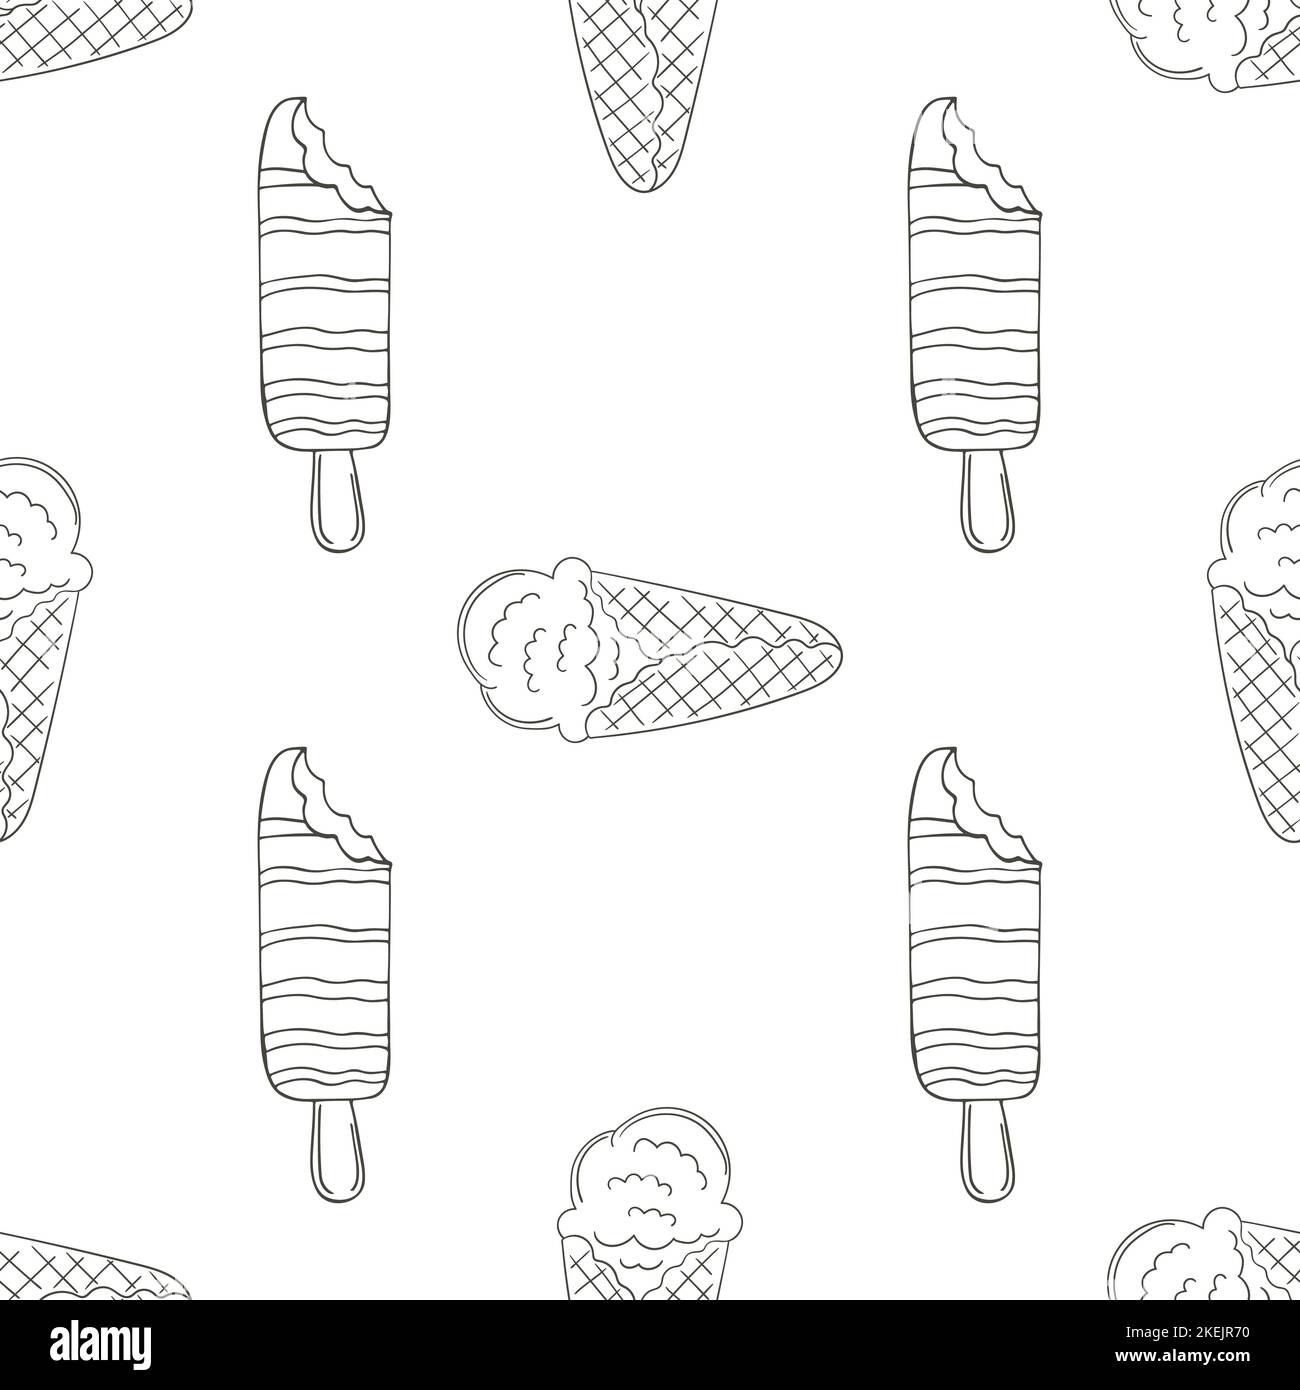 Summer. Coloring ice cream seamless pattern. Wonderful bright pattern with sweet cold dessert. Print for cloth design, textile, fabric, wallpaper Stock Vector